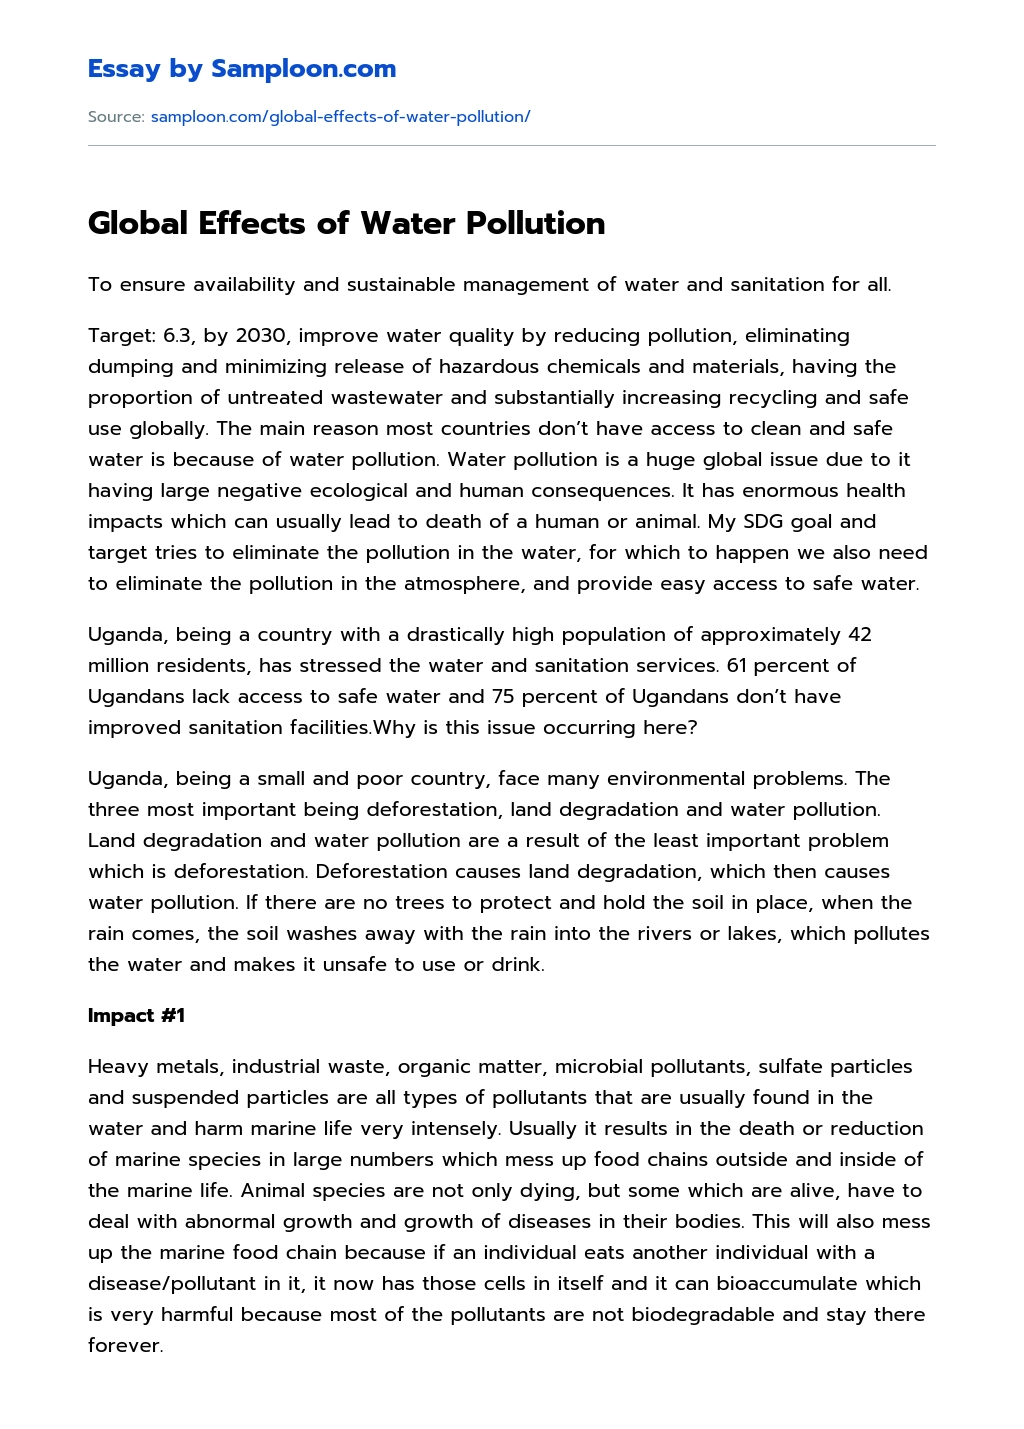 Global Effects of Water Pollution essay